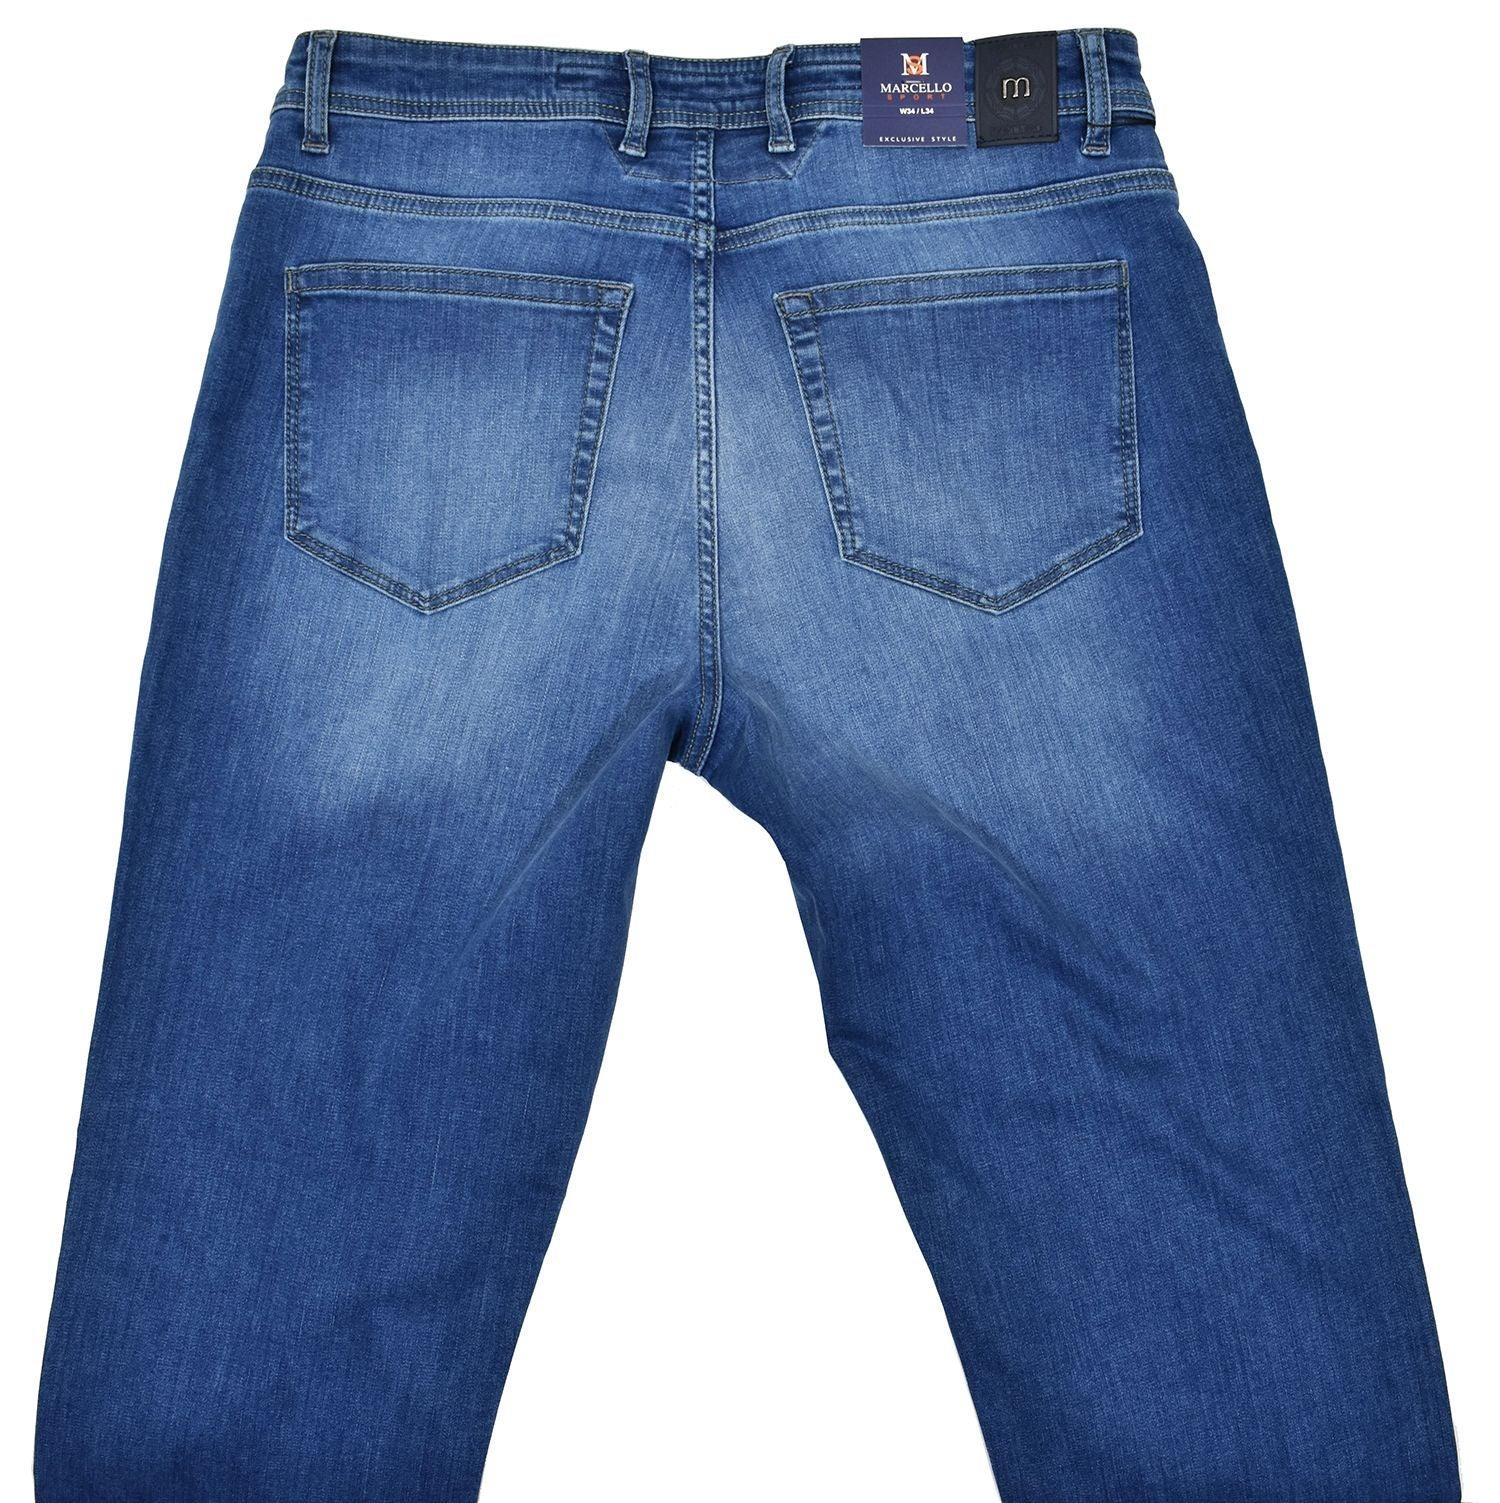 Marcello’s best fitting lightweight washed denim. Feels and looks great! Our comfort fit from the waist band down to the thighs, then tapering the leg to the bottom provides the best of both worlds.  Comfort where you need it and updated fashion sporting a slimmed leg.  Add the benefit of stretch to work with your natural movements and you have found an excellent jean that will become your go to jean of choice.  Marcello Comfort Washed Denim